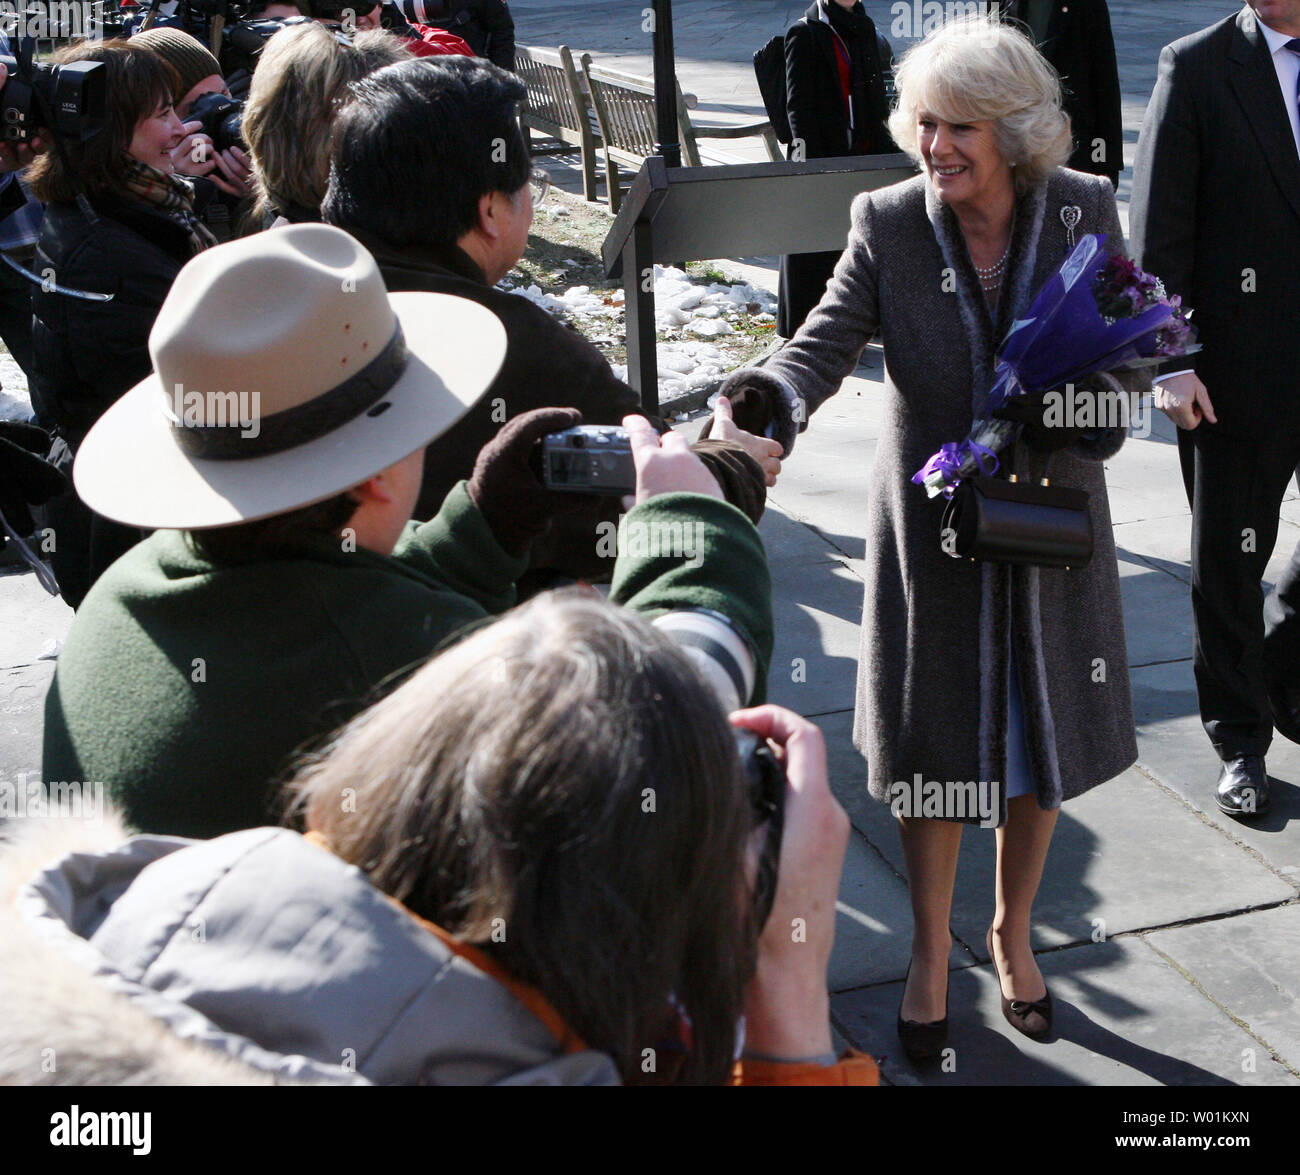 camilla-parker-bowles-the-duchess-of-cornwall-greets-the-crowd-after-receiving-a-bouquet-of-flowers-upon-her-arrival-at-independence-hall-in-philadelphia-on-january-27-2007-she-and-prince-charles-are-on-a-2-day-visit-to-philadelphia-and-new-york-upi-photojohn-anderson-W01KXN.jpg